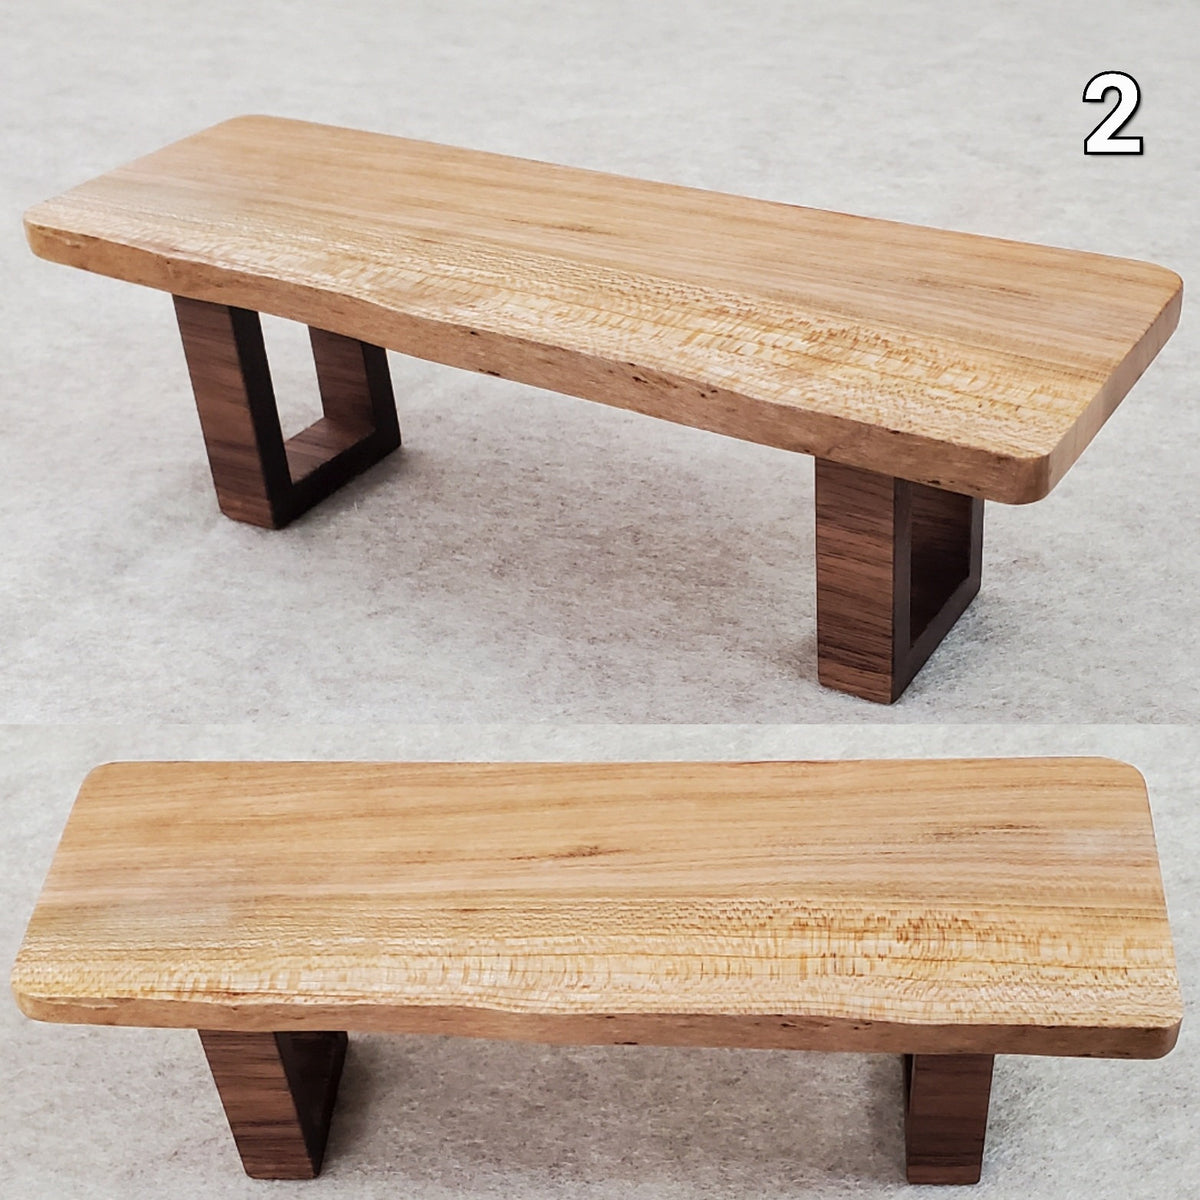 Live Edge Coffee Table for 1:6 Scale Doll - Solid hardwood